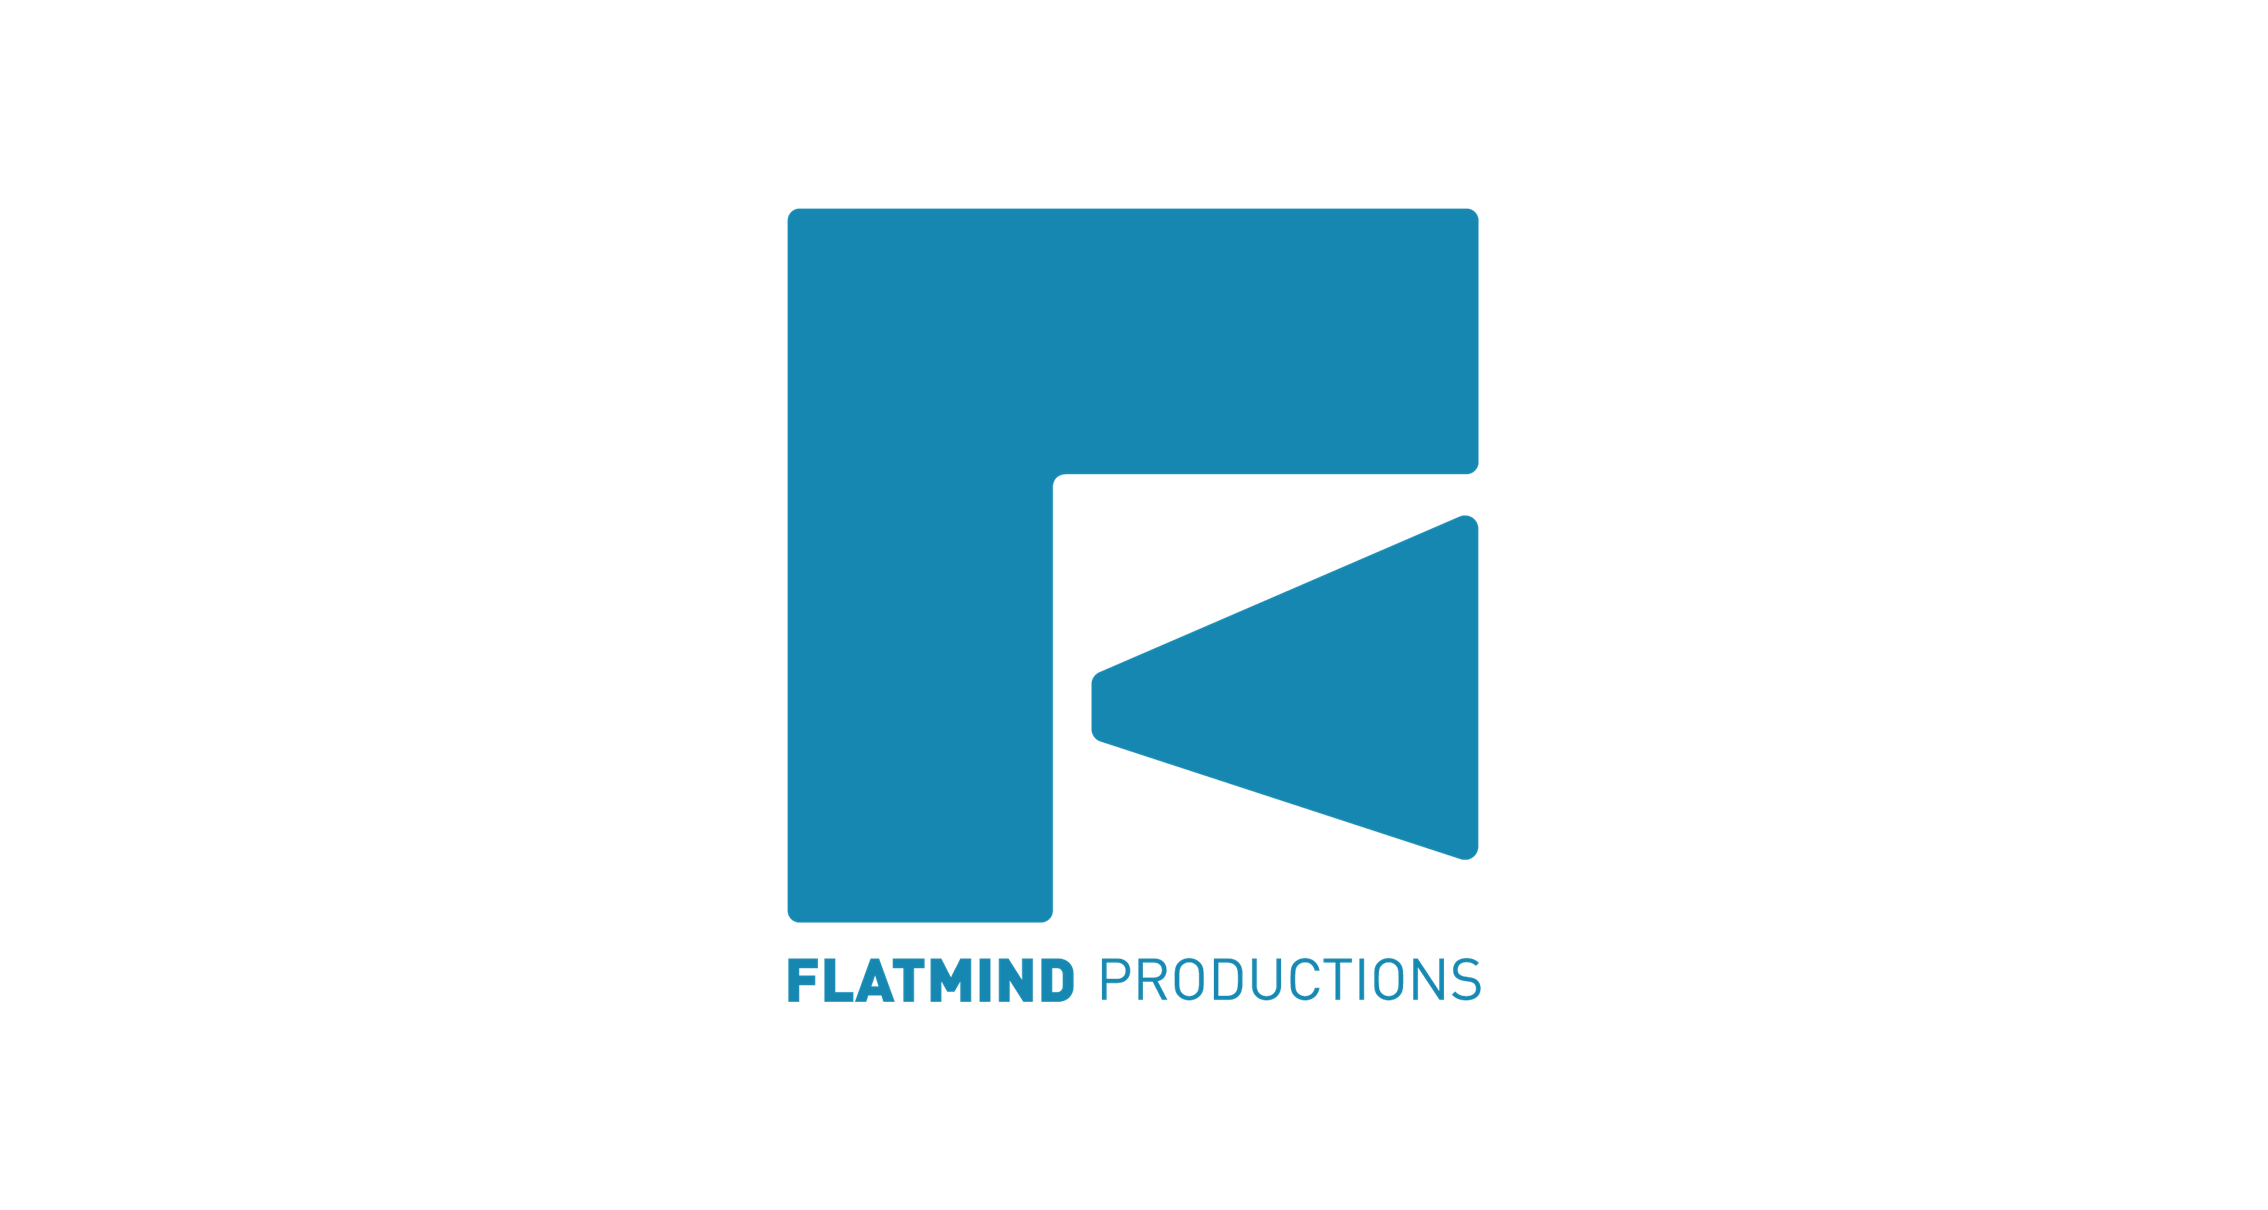 Flatmind Productions